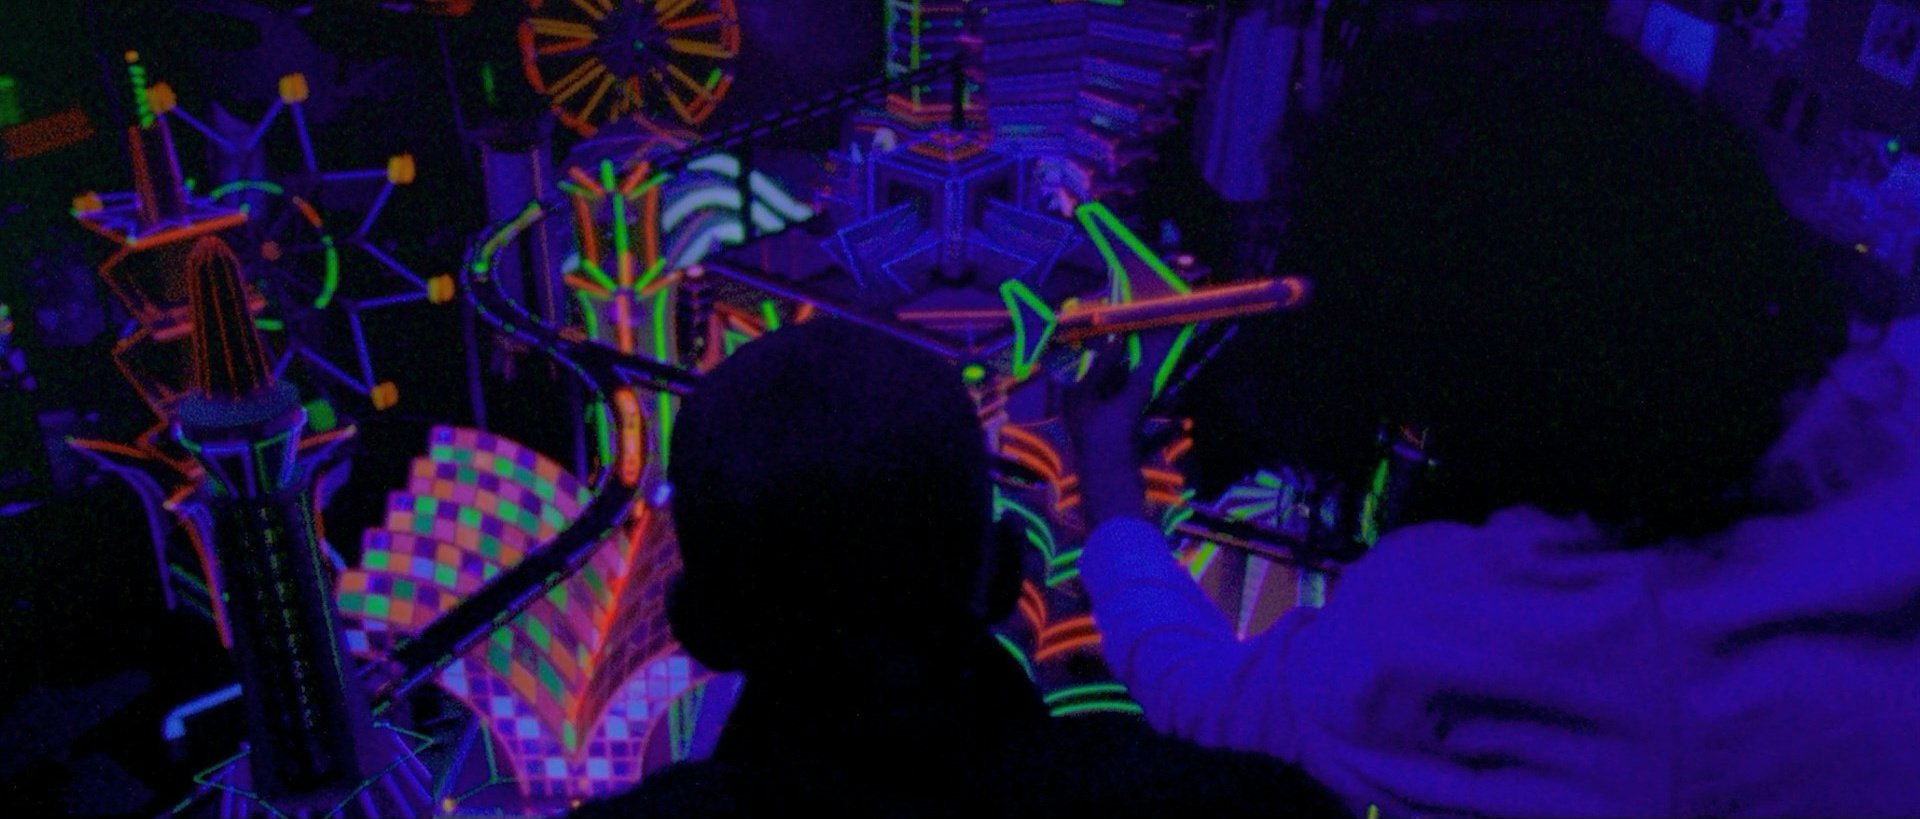 Enter The Void (2009)